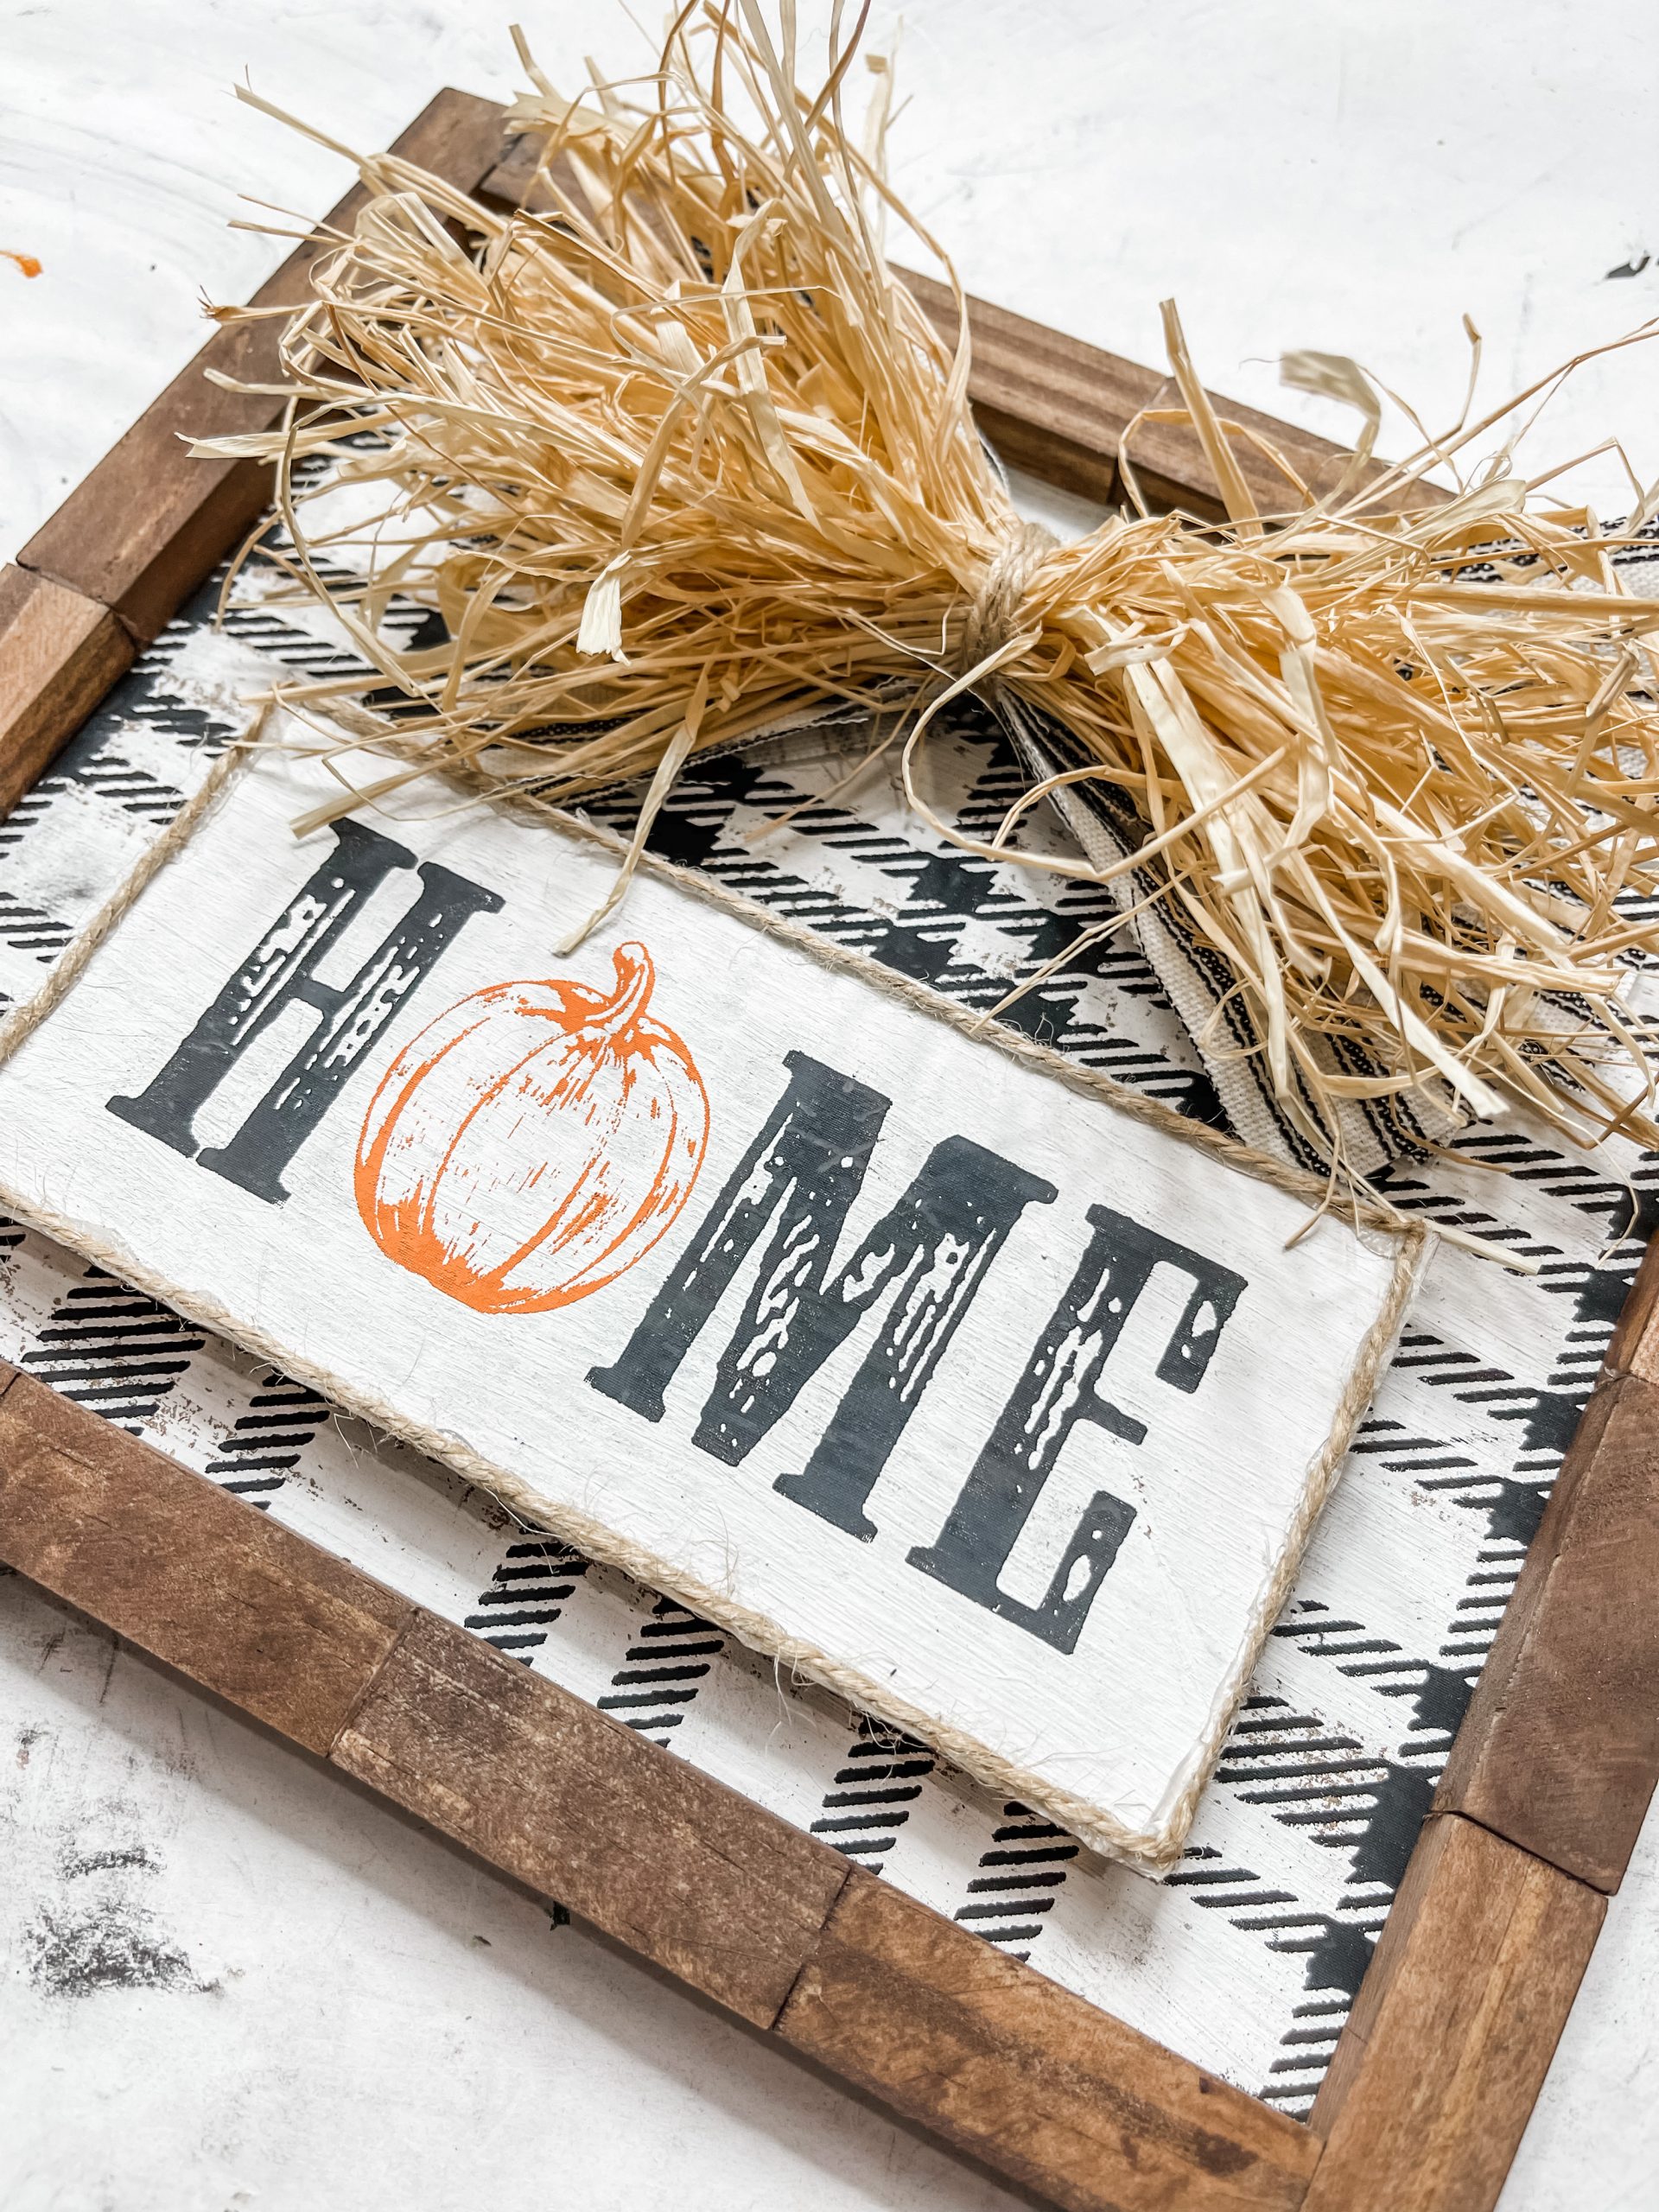 DIY Stenciled Home Fall Sign